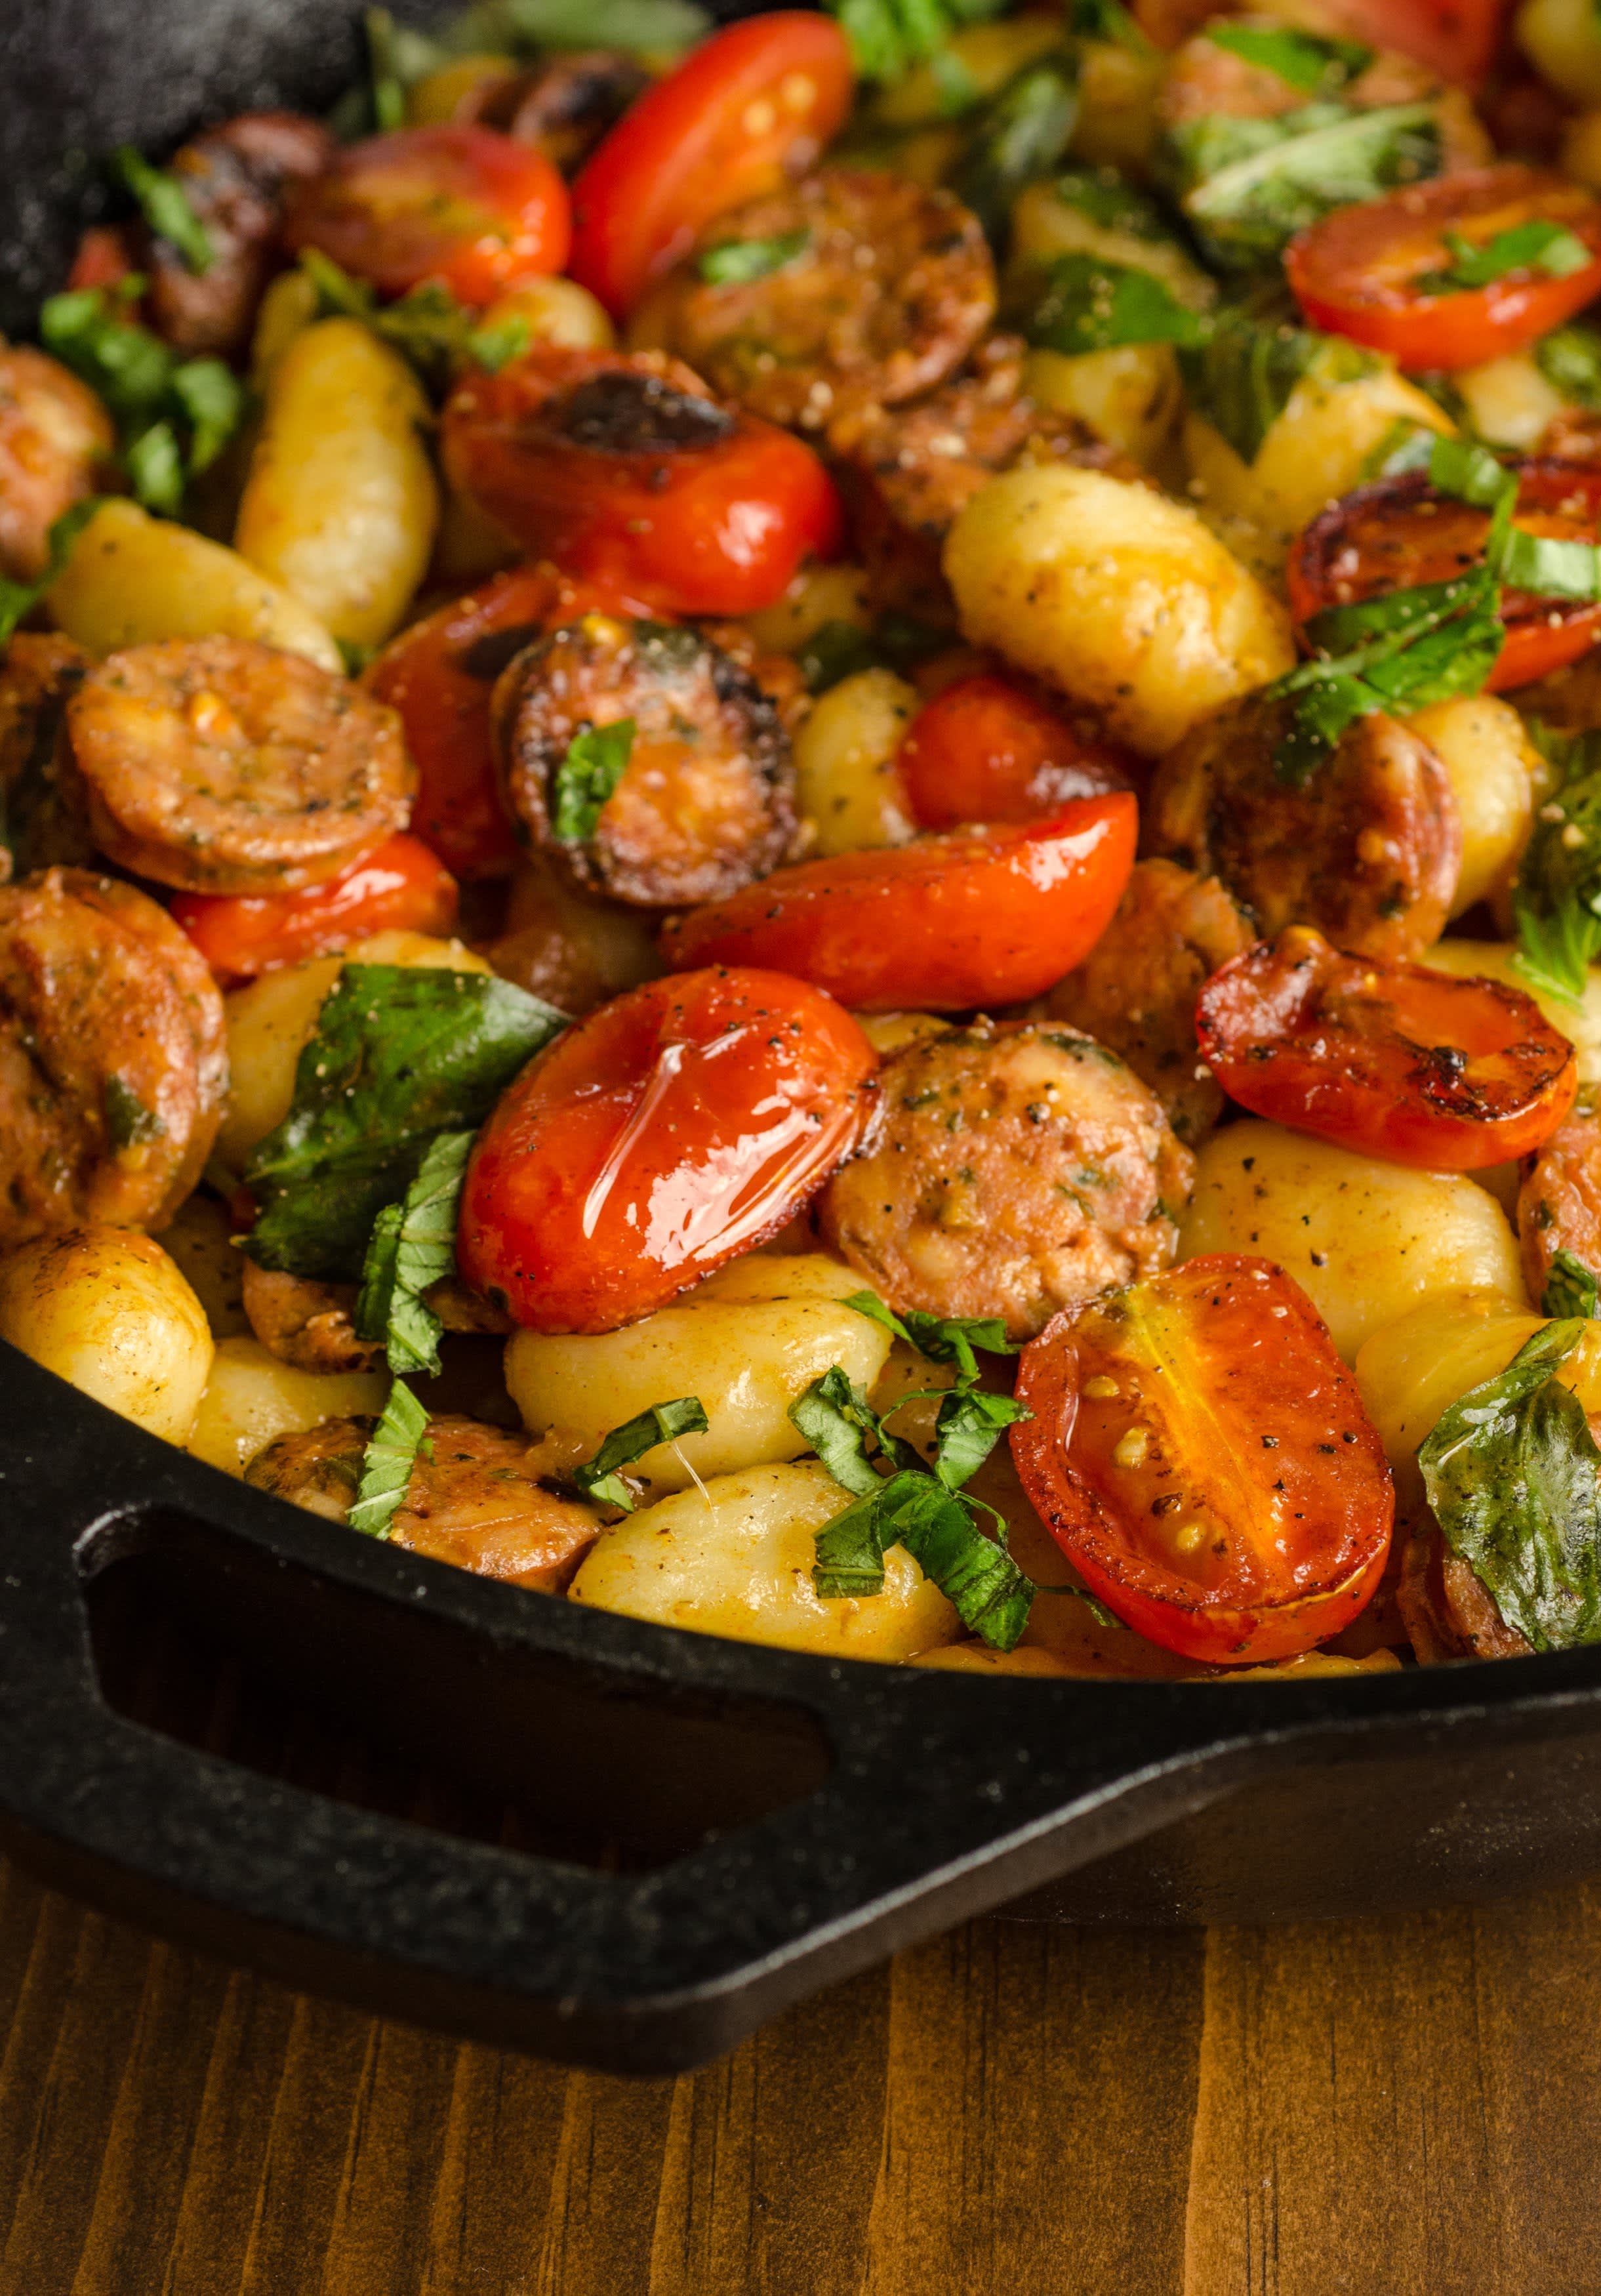 Recipe: Gnocchi Skillet with Chicken Sausage & Tomatoes